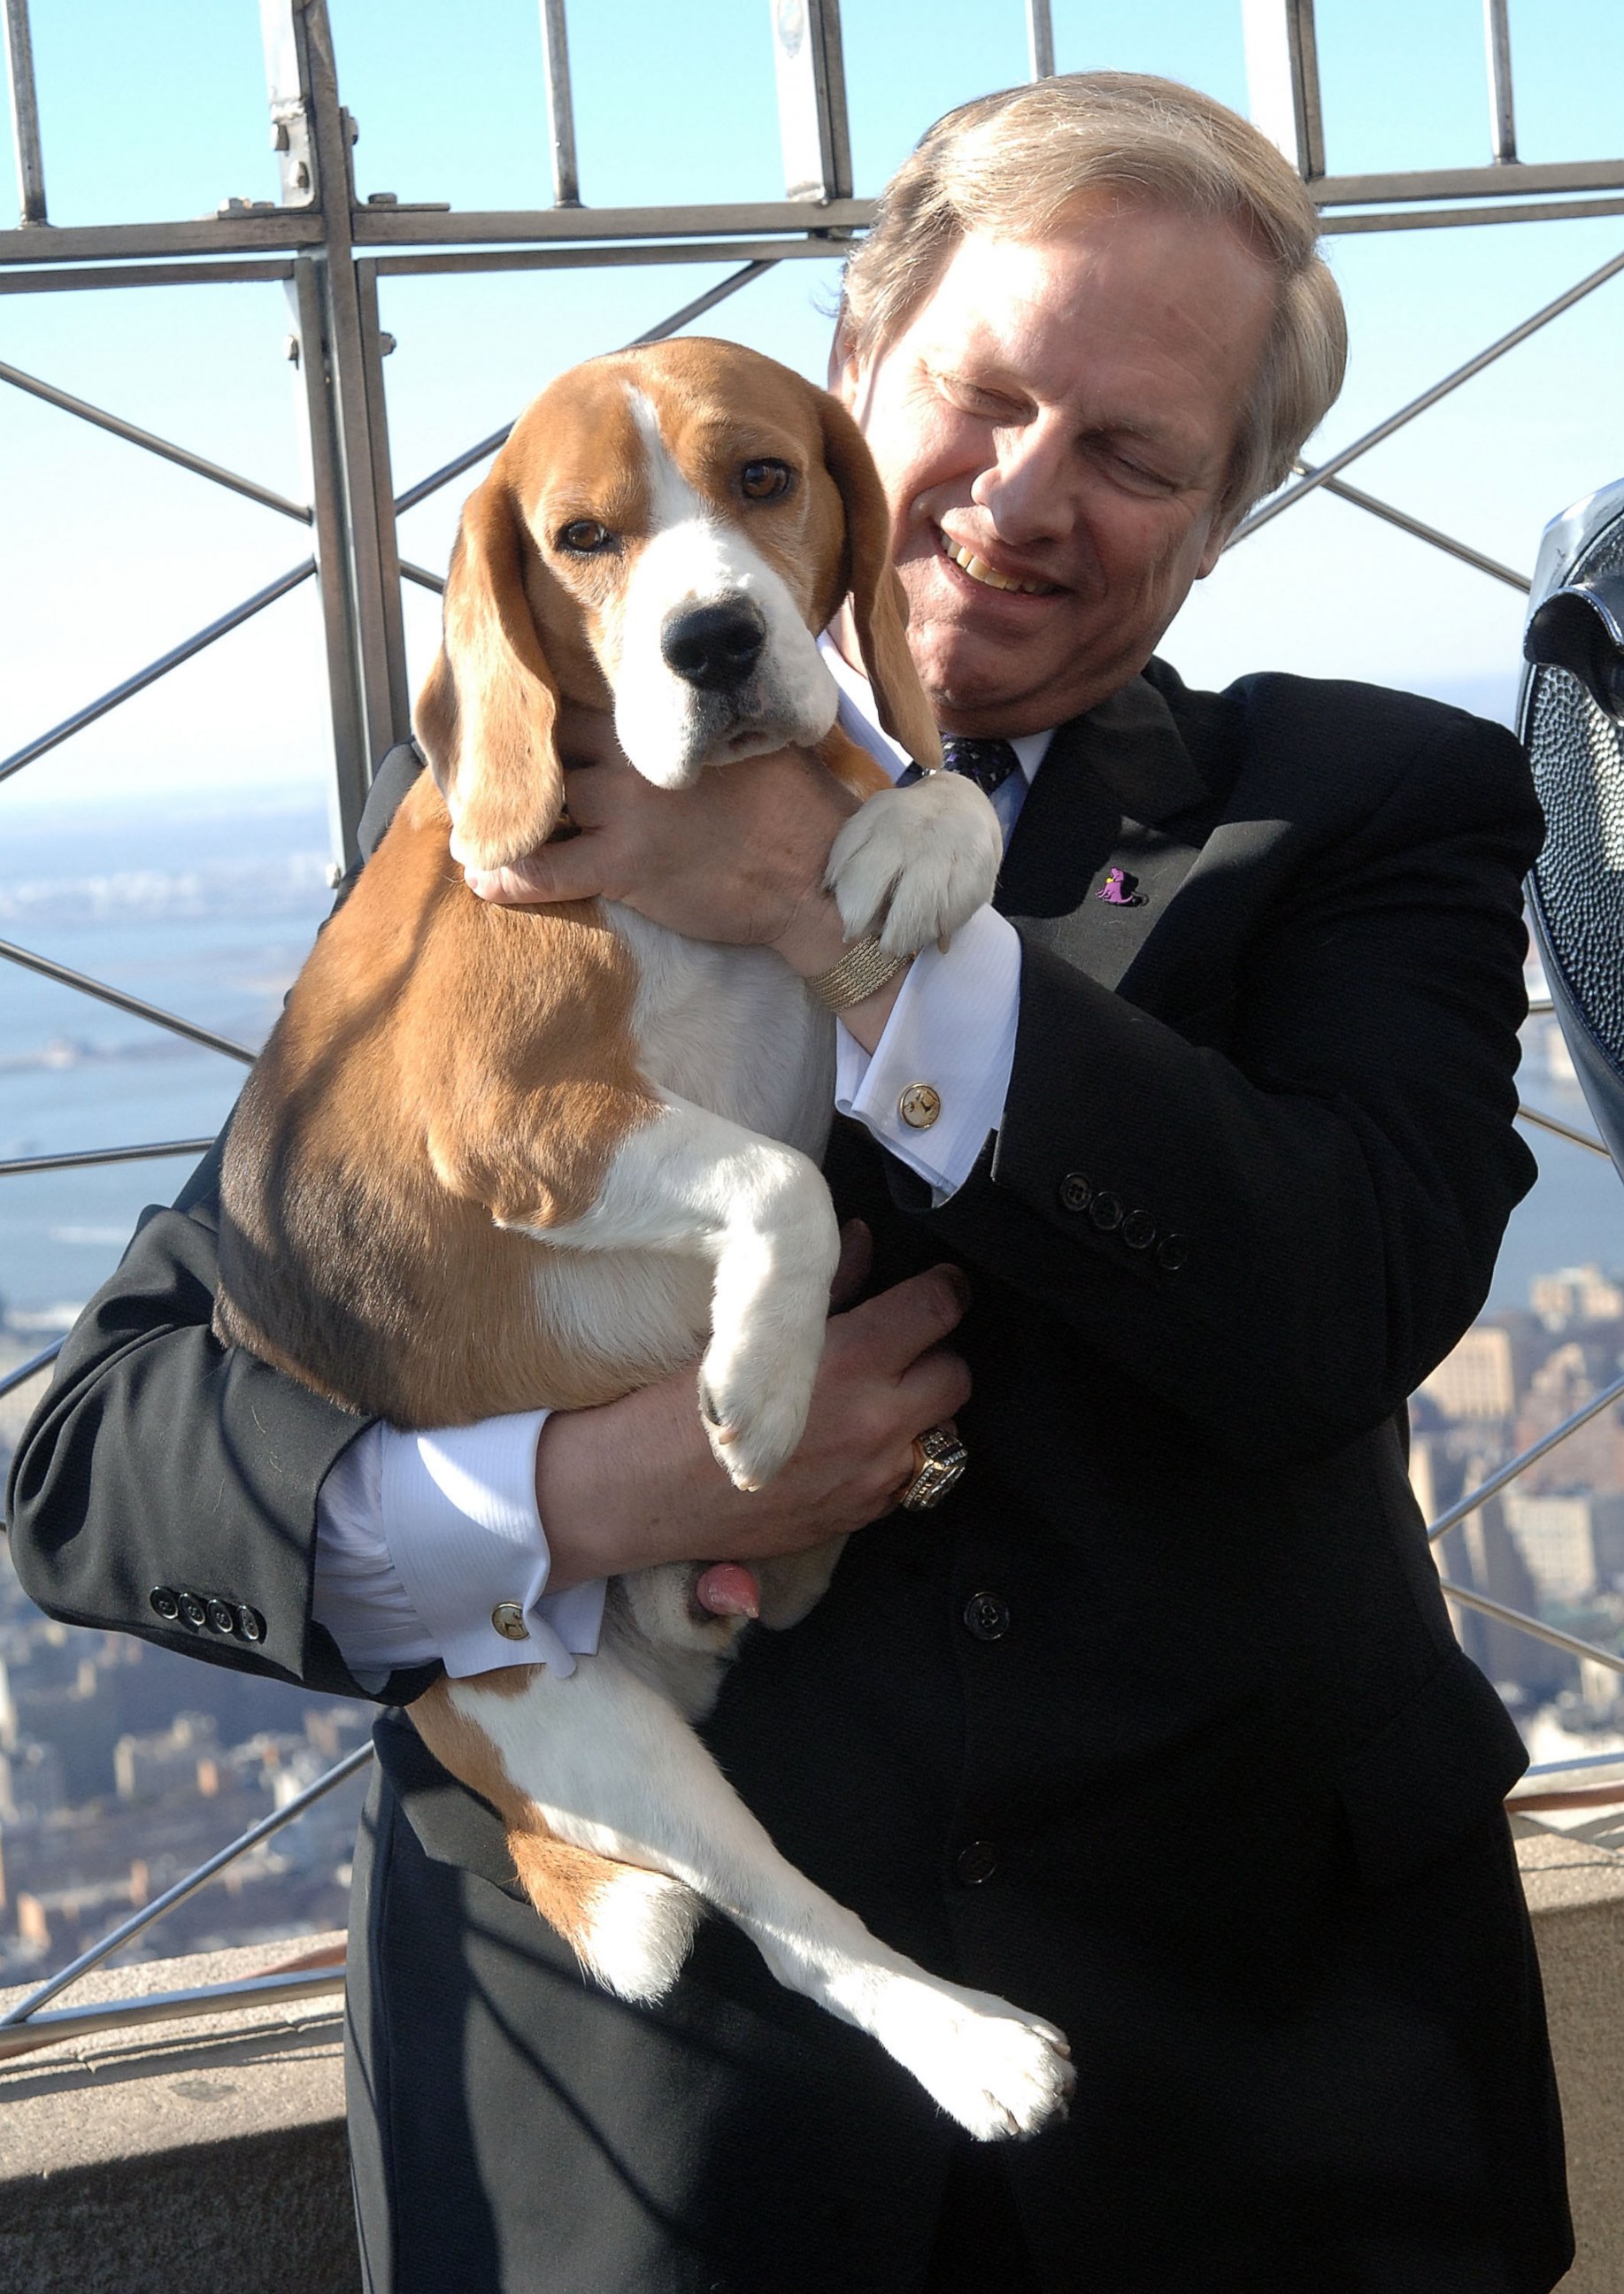 PHOTO: Uno, the 2008 Westminster "Best in Show Winner," and Westminster Kennel Club Director of Communications David Frei visit the top of the Empire State Building on Feb. 9, 2009 in New York City.  